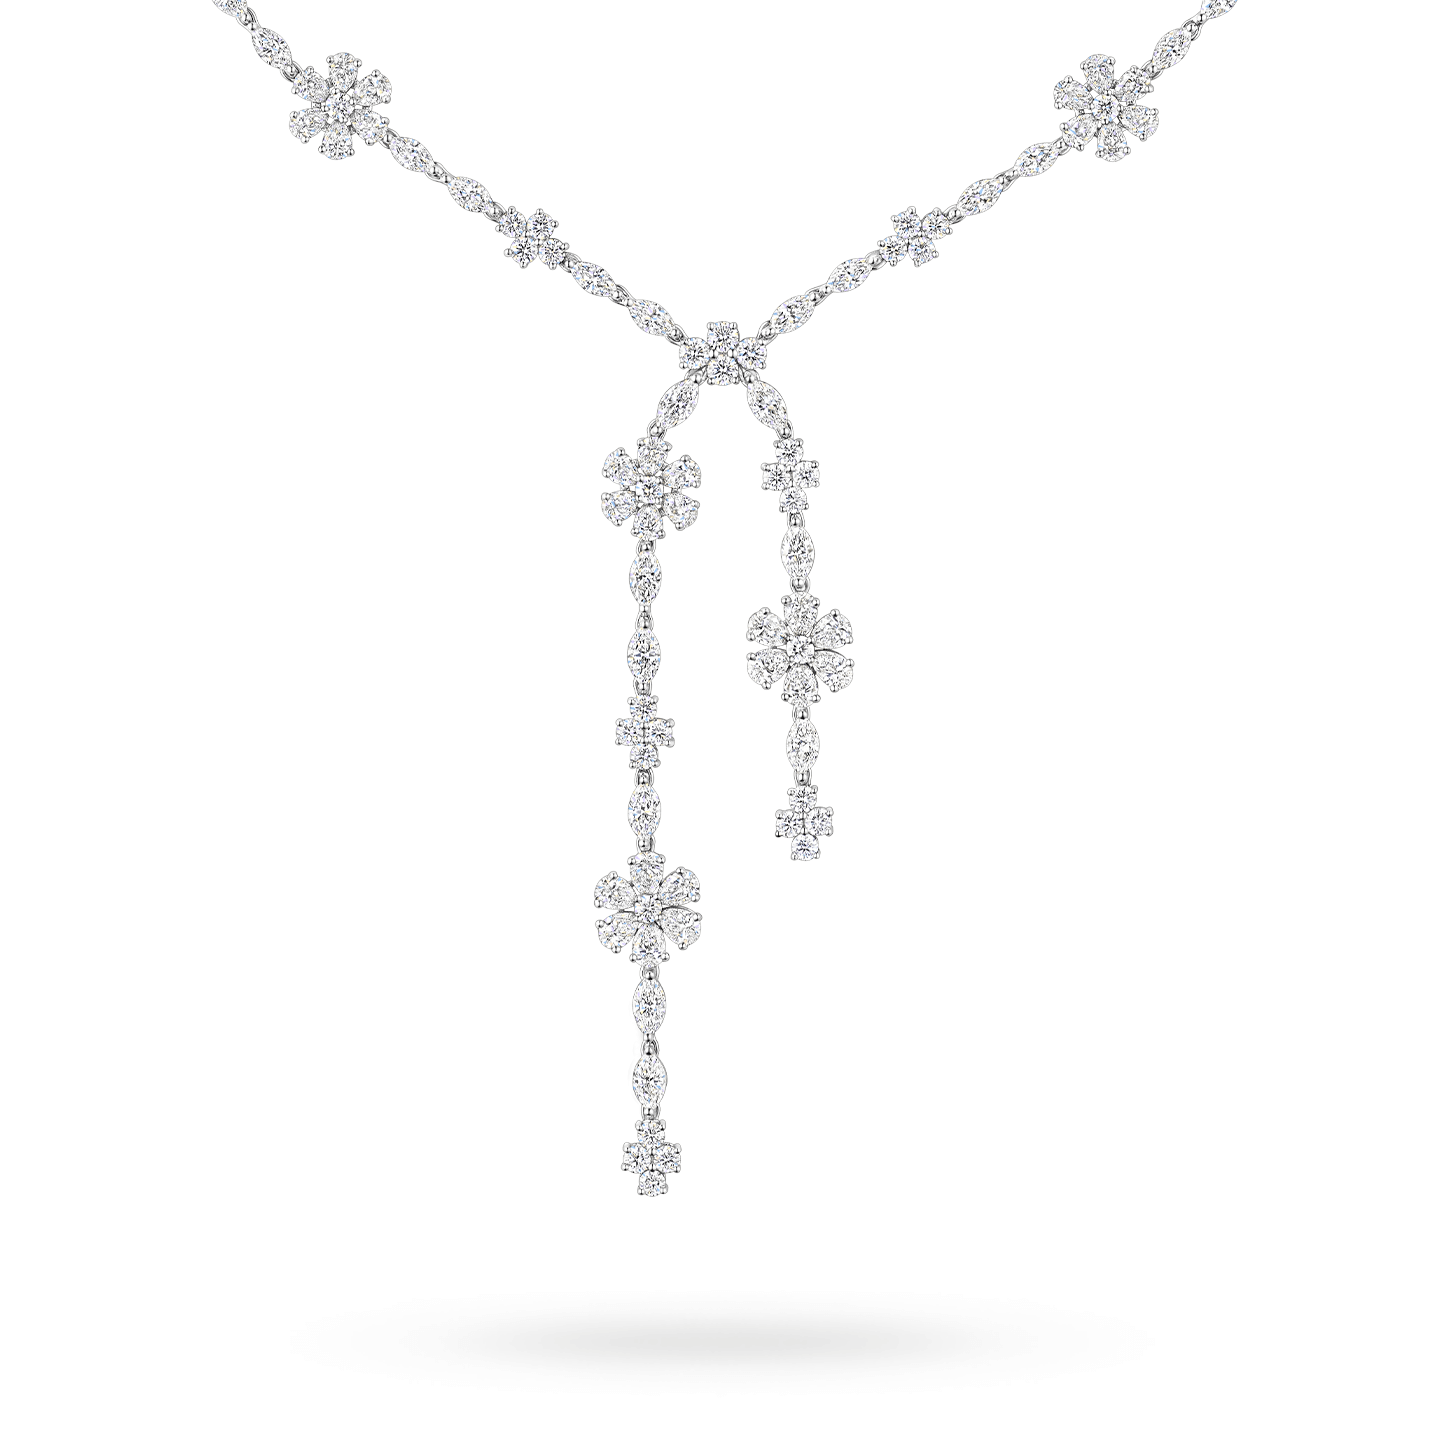 Forget-Me-Not Lariat Diamond Necklace, Product Image 2